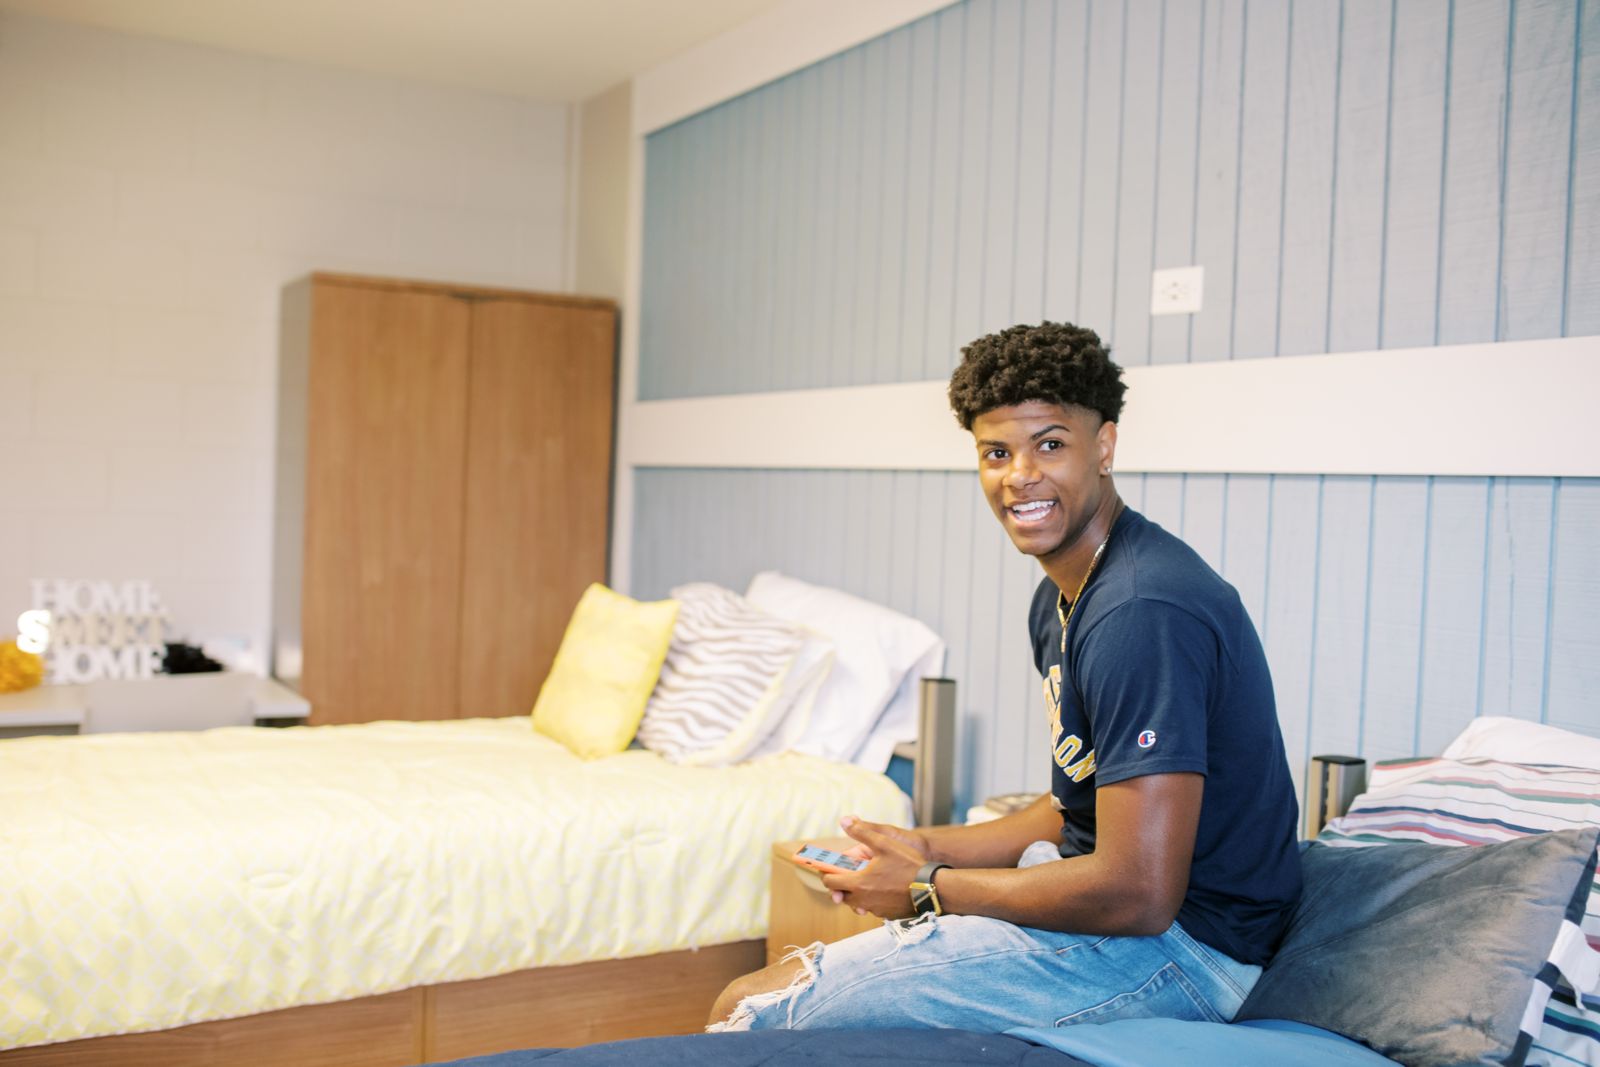 Interior dorm room at Southern Union State Community College